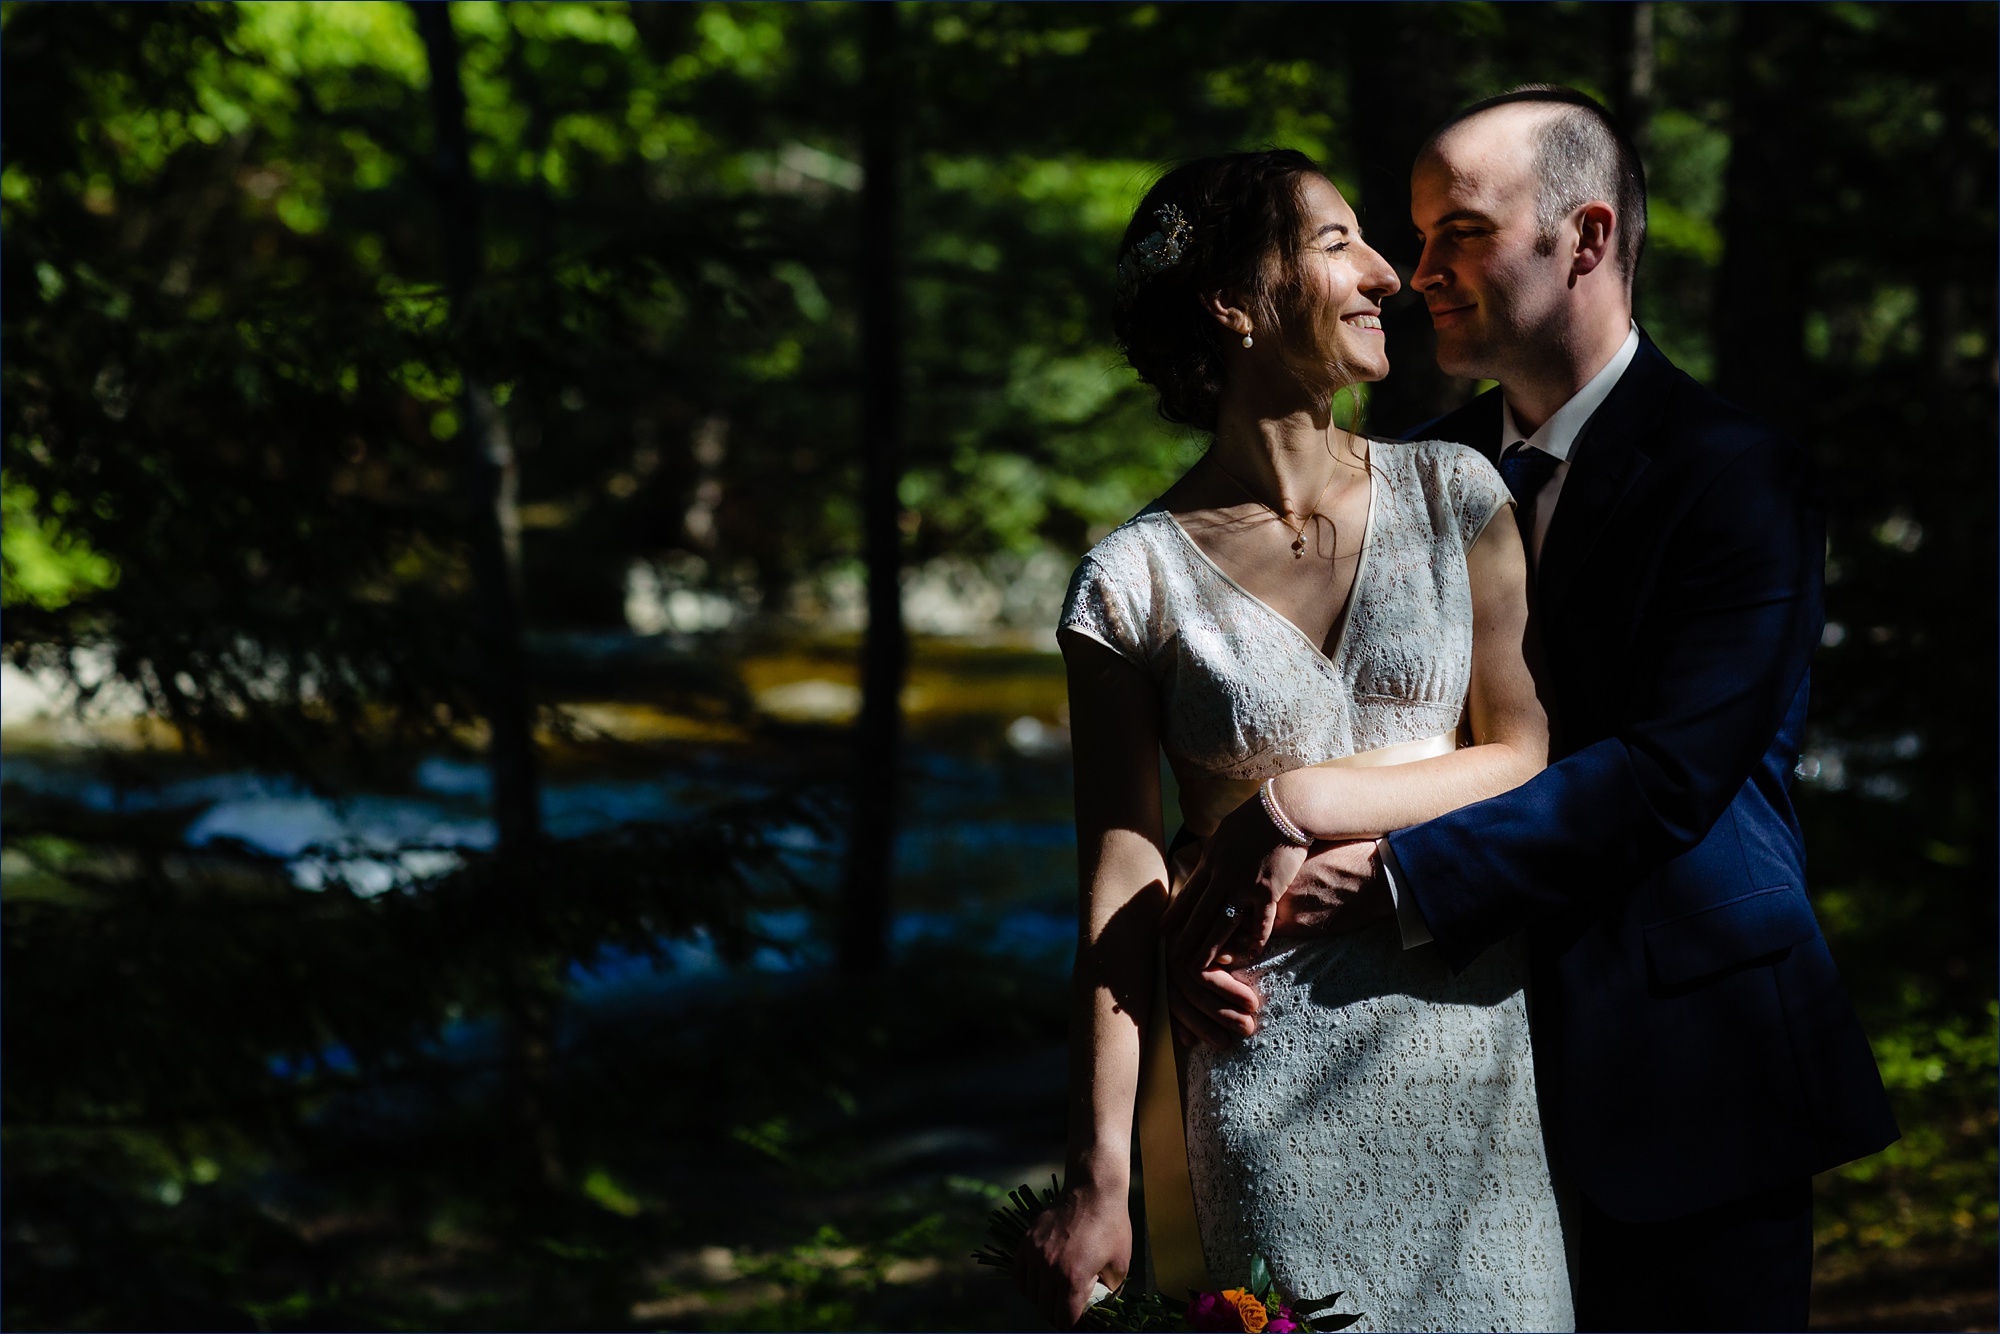 The bright pockets of sun illuminate the couple as they take photos in the woods of New Hampshire after their intimate wedding